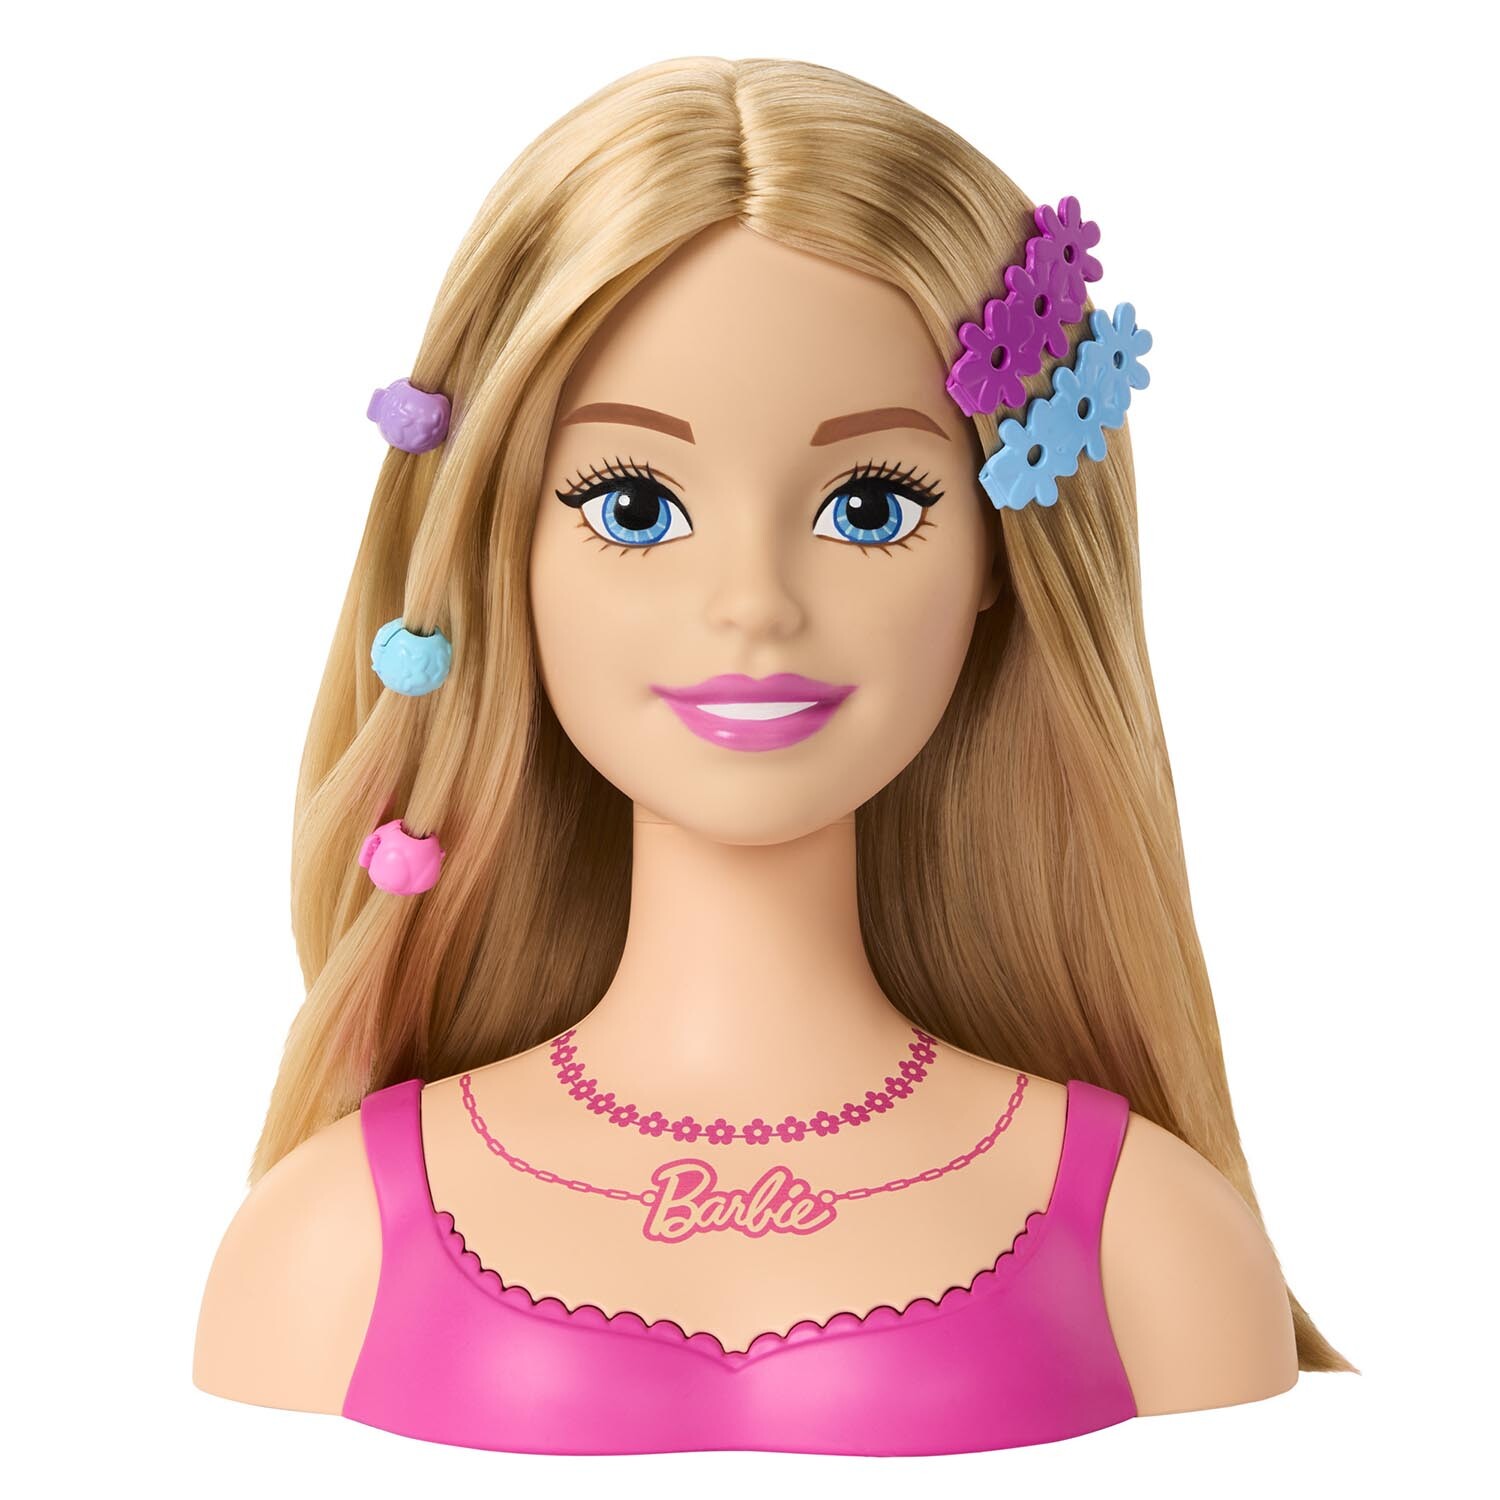 Barbie Styling Head and Accessories - Pink Image 7